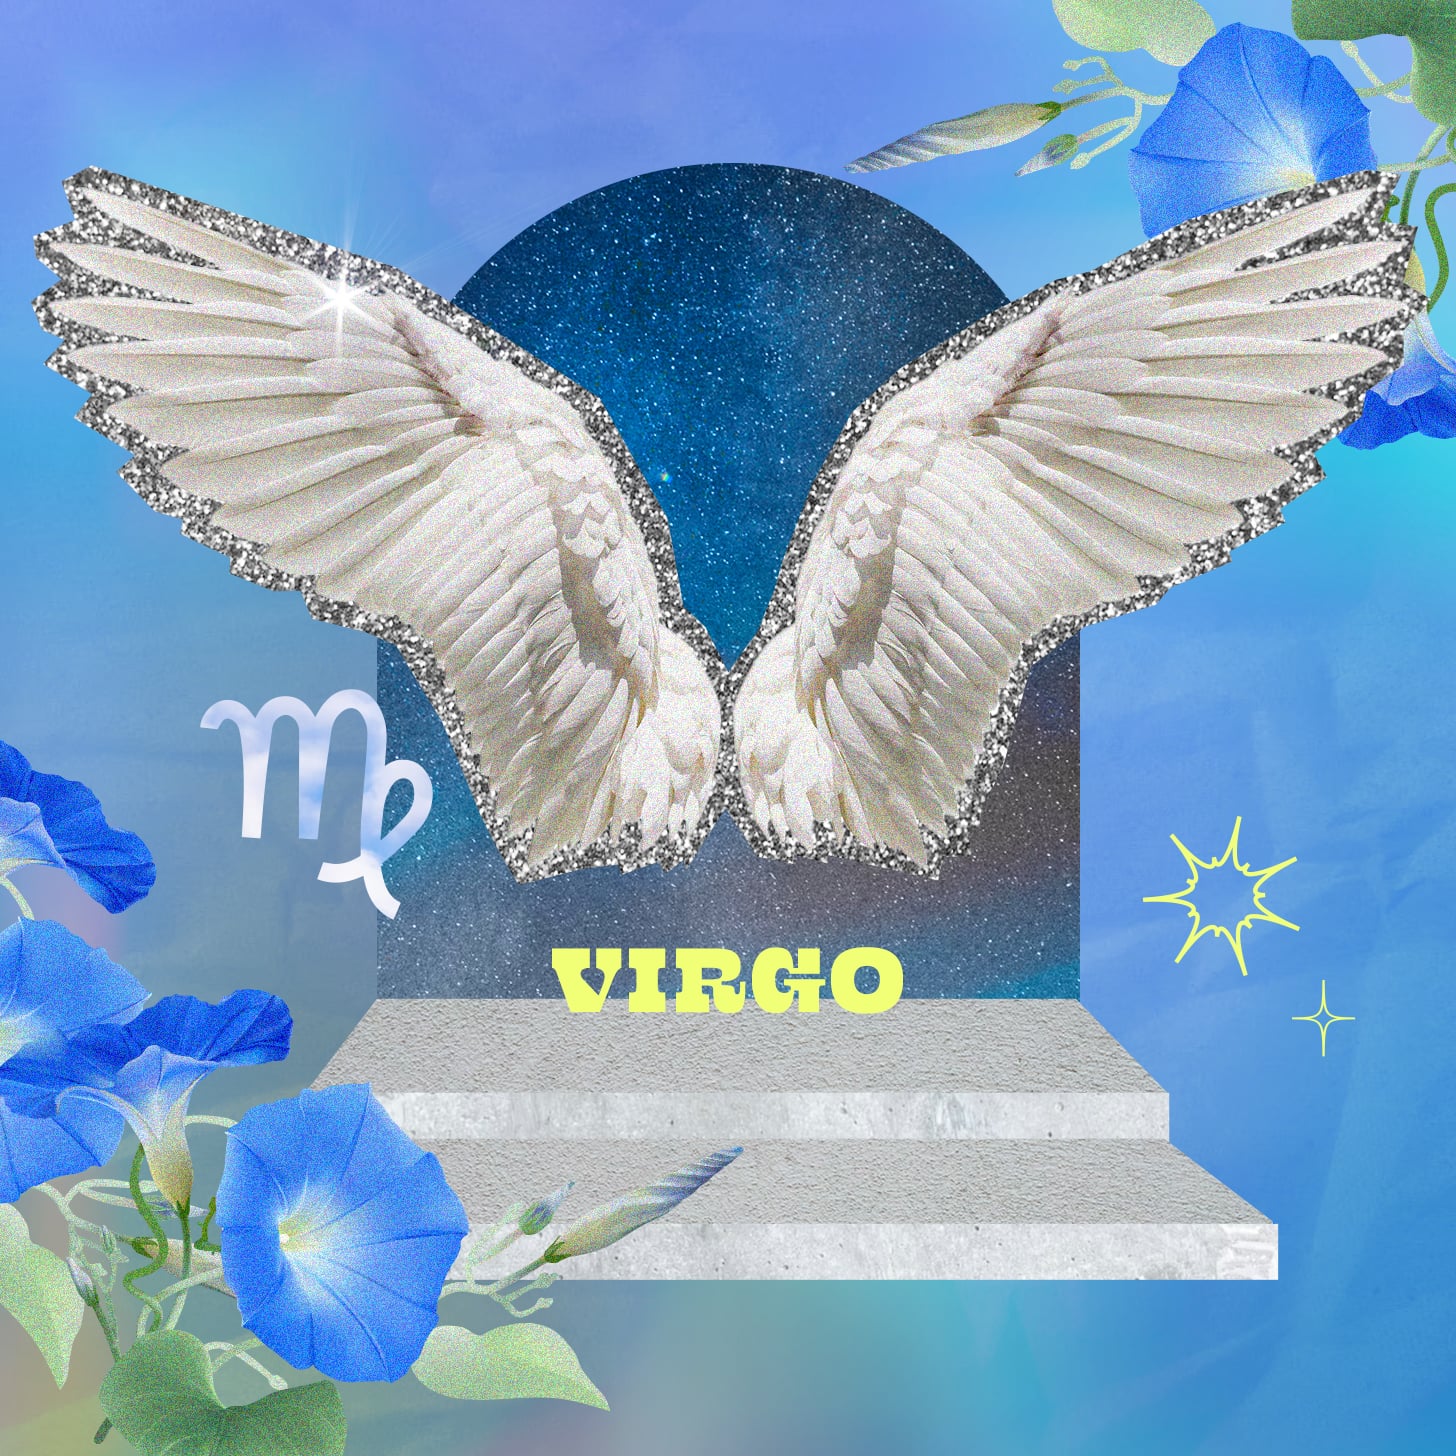 tmp_Fj4OuP_a3ad599fb4c69014_PS21_Astrology_Yearly_Virgo_1456x1456.jpg